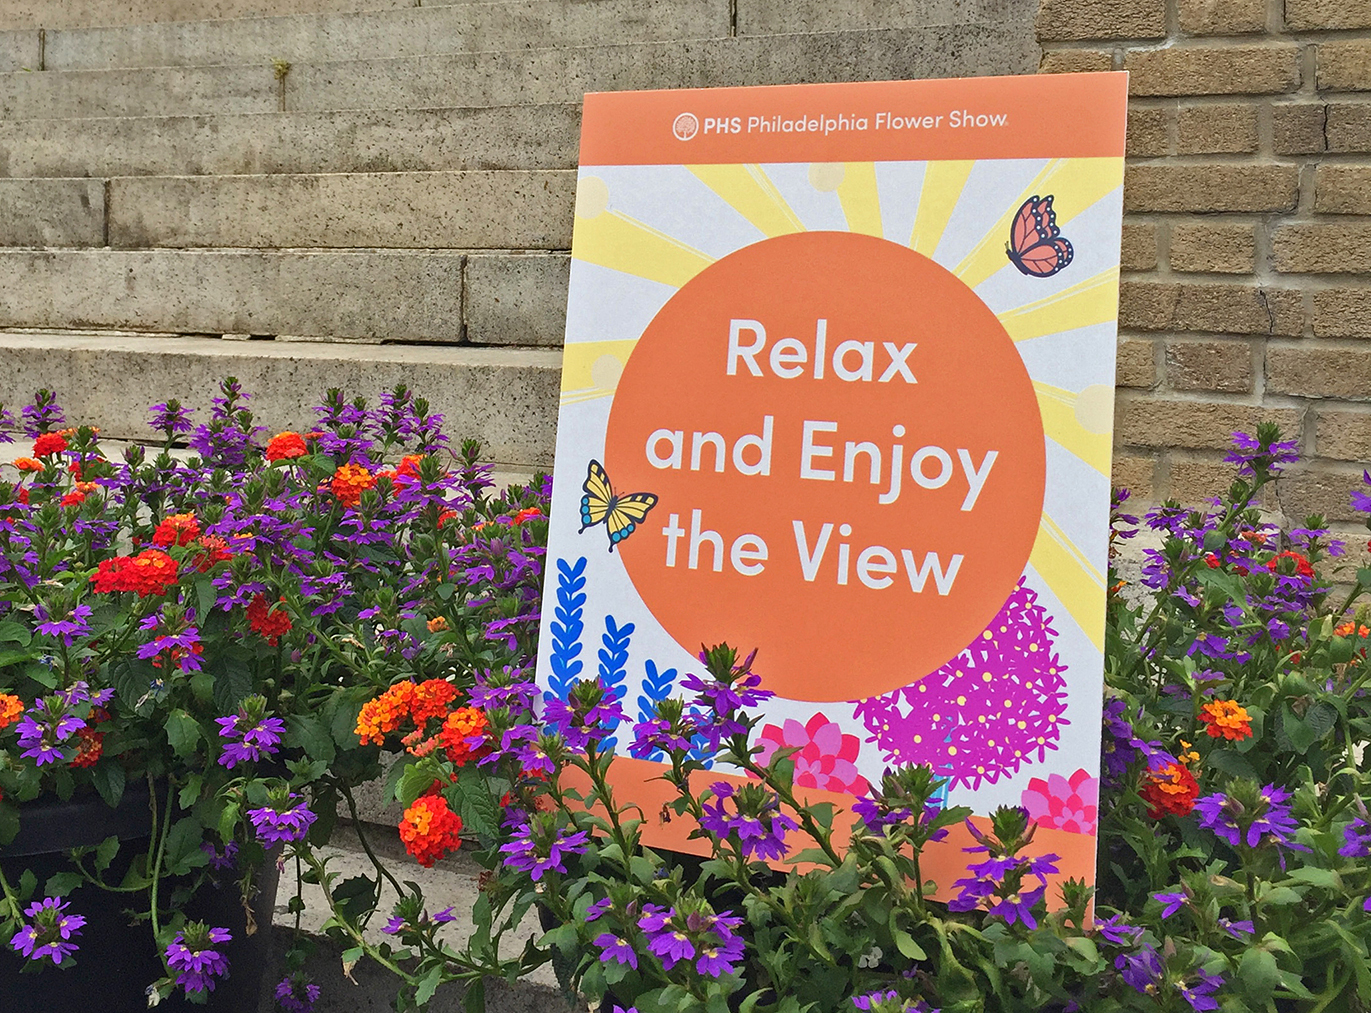 Signage to encourage enjoying the view from the Boathouse outdoor restaurant at the 2021 PHS Philadelphia Flower Show.